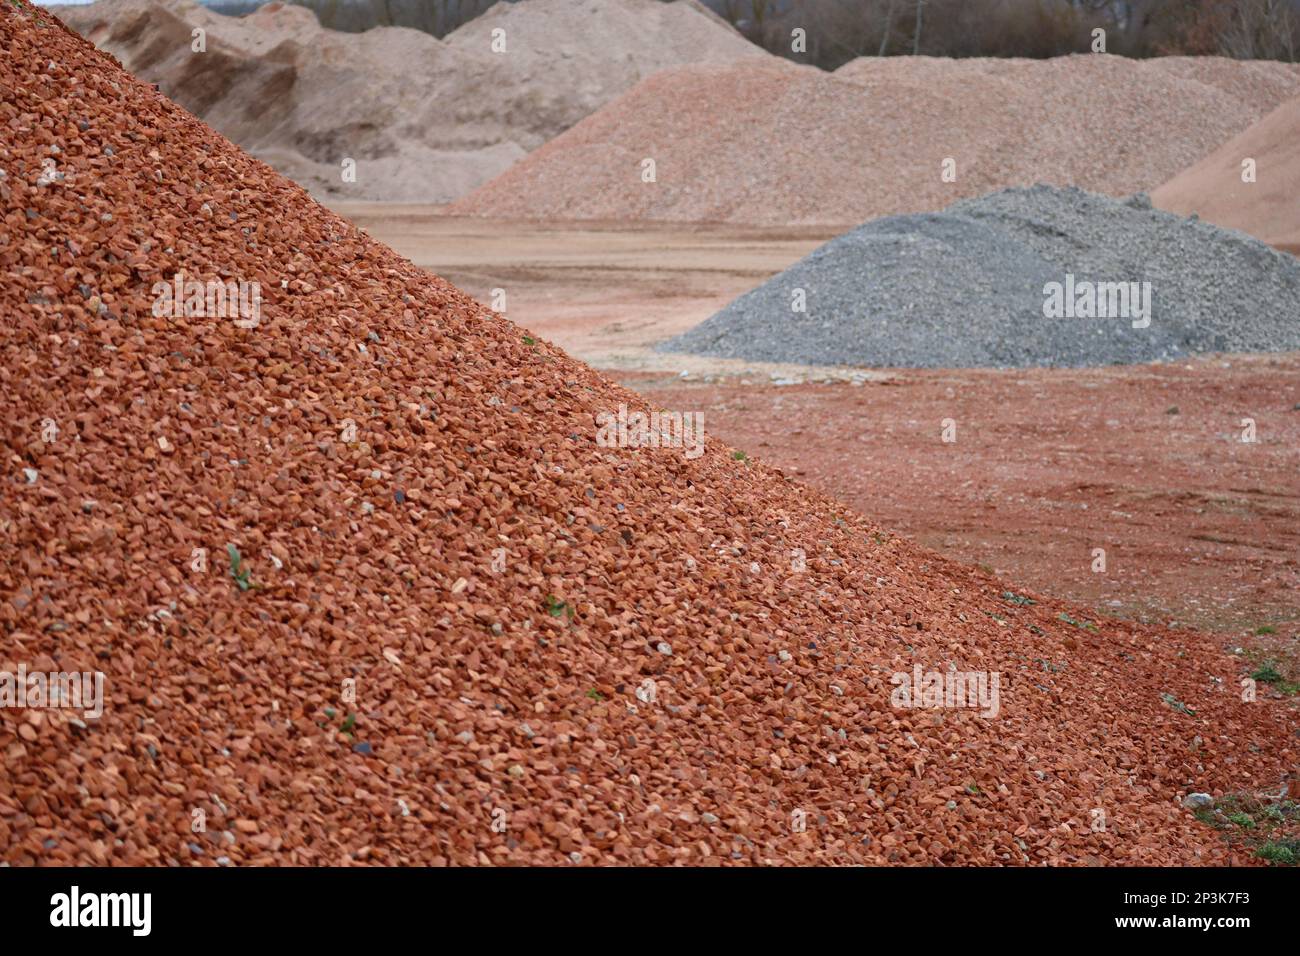 shredded Roof tiles at a Landfill Stock Photo